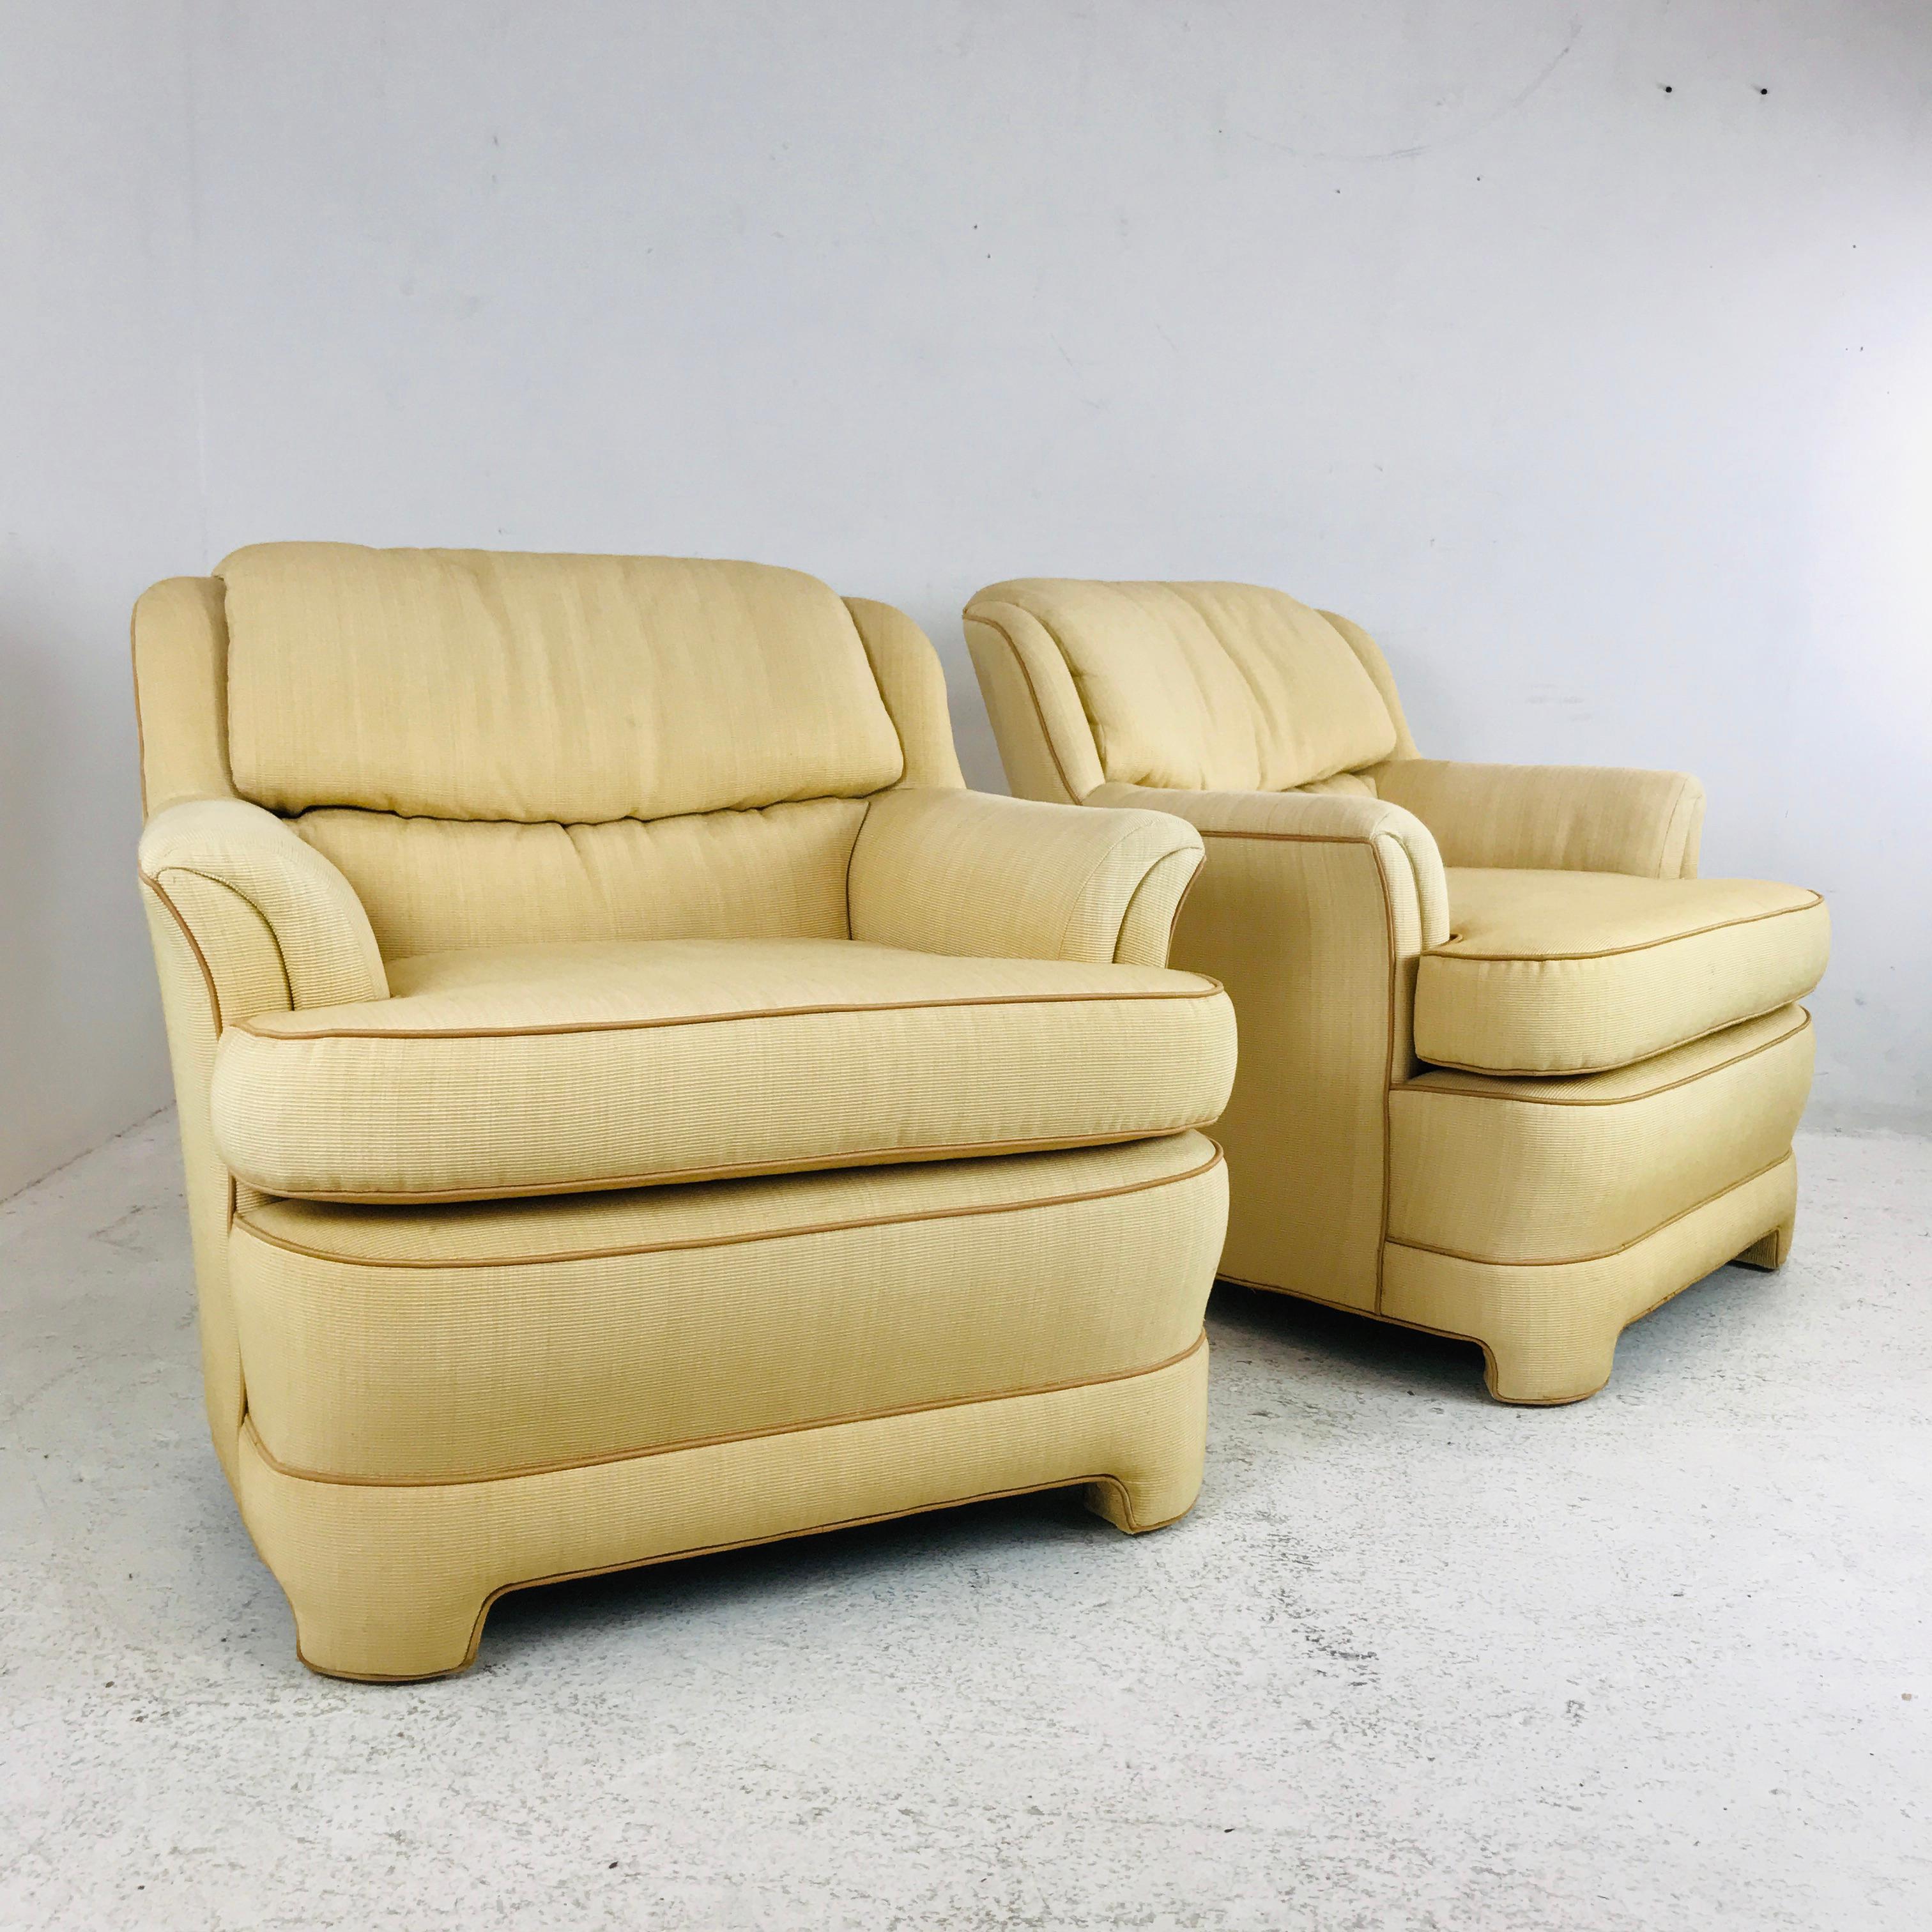 Pair of beige 1980s Marge Carson armchairs with original tag. Reupholstery recommended.